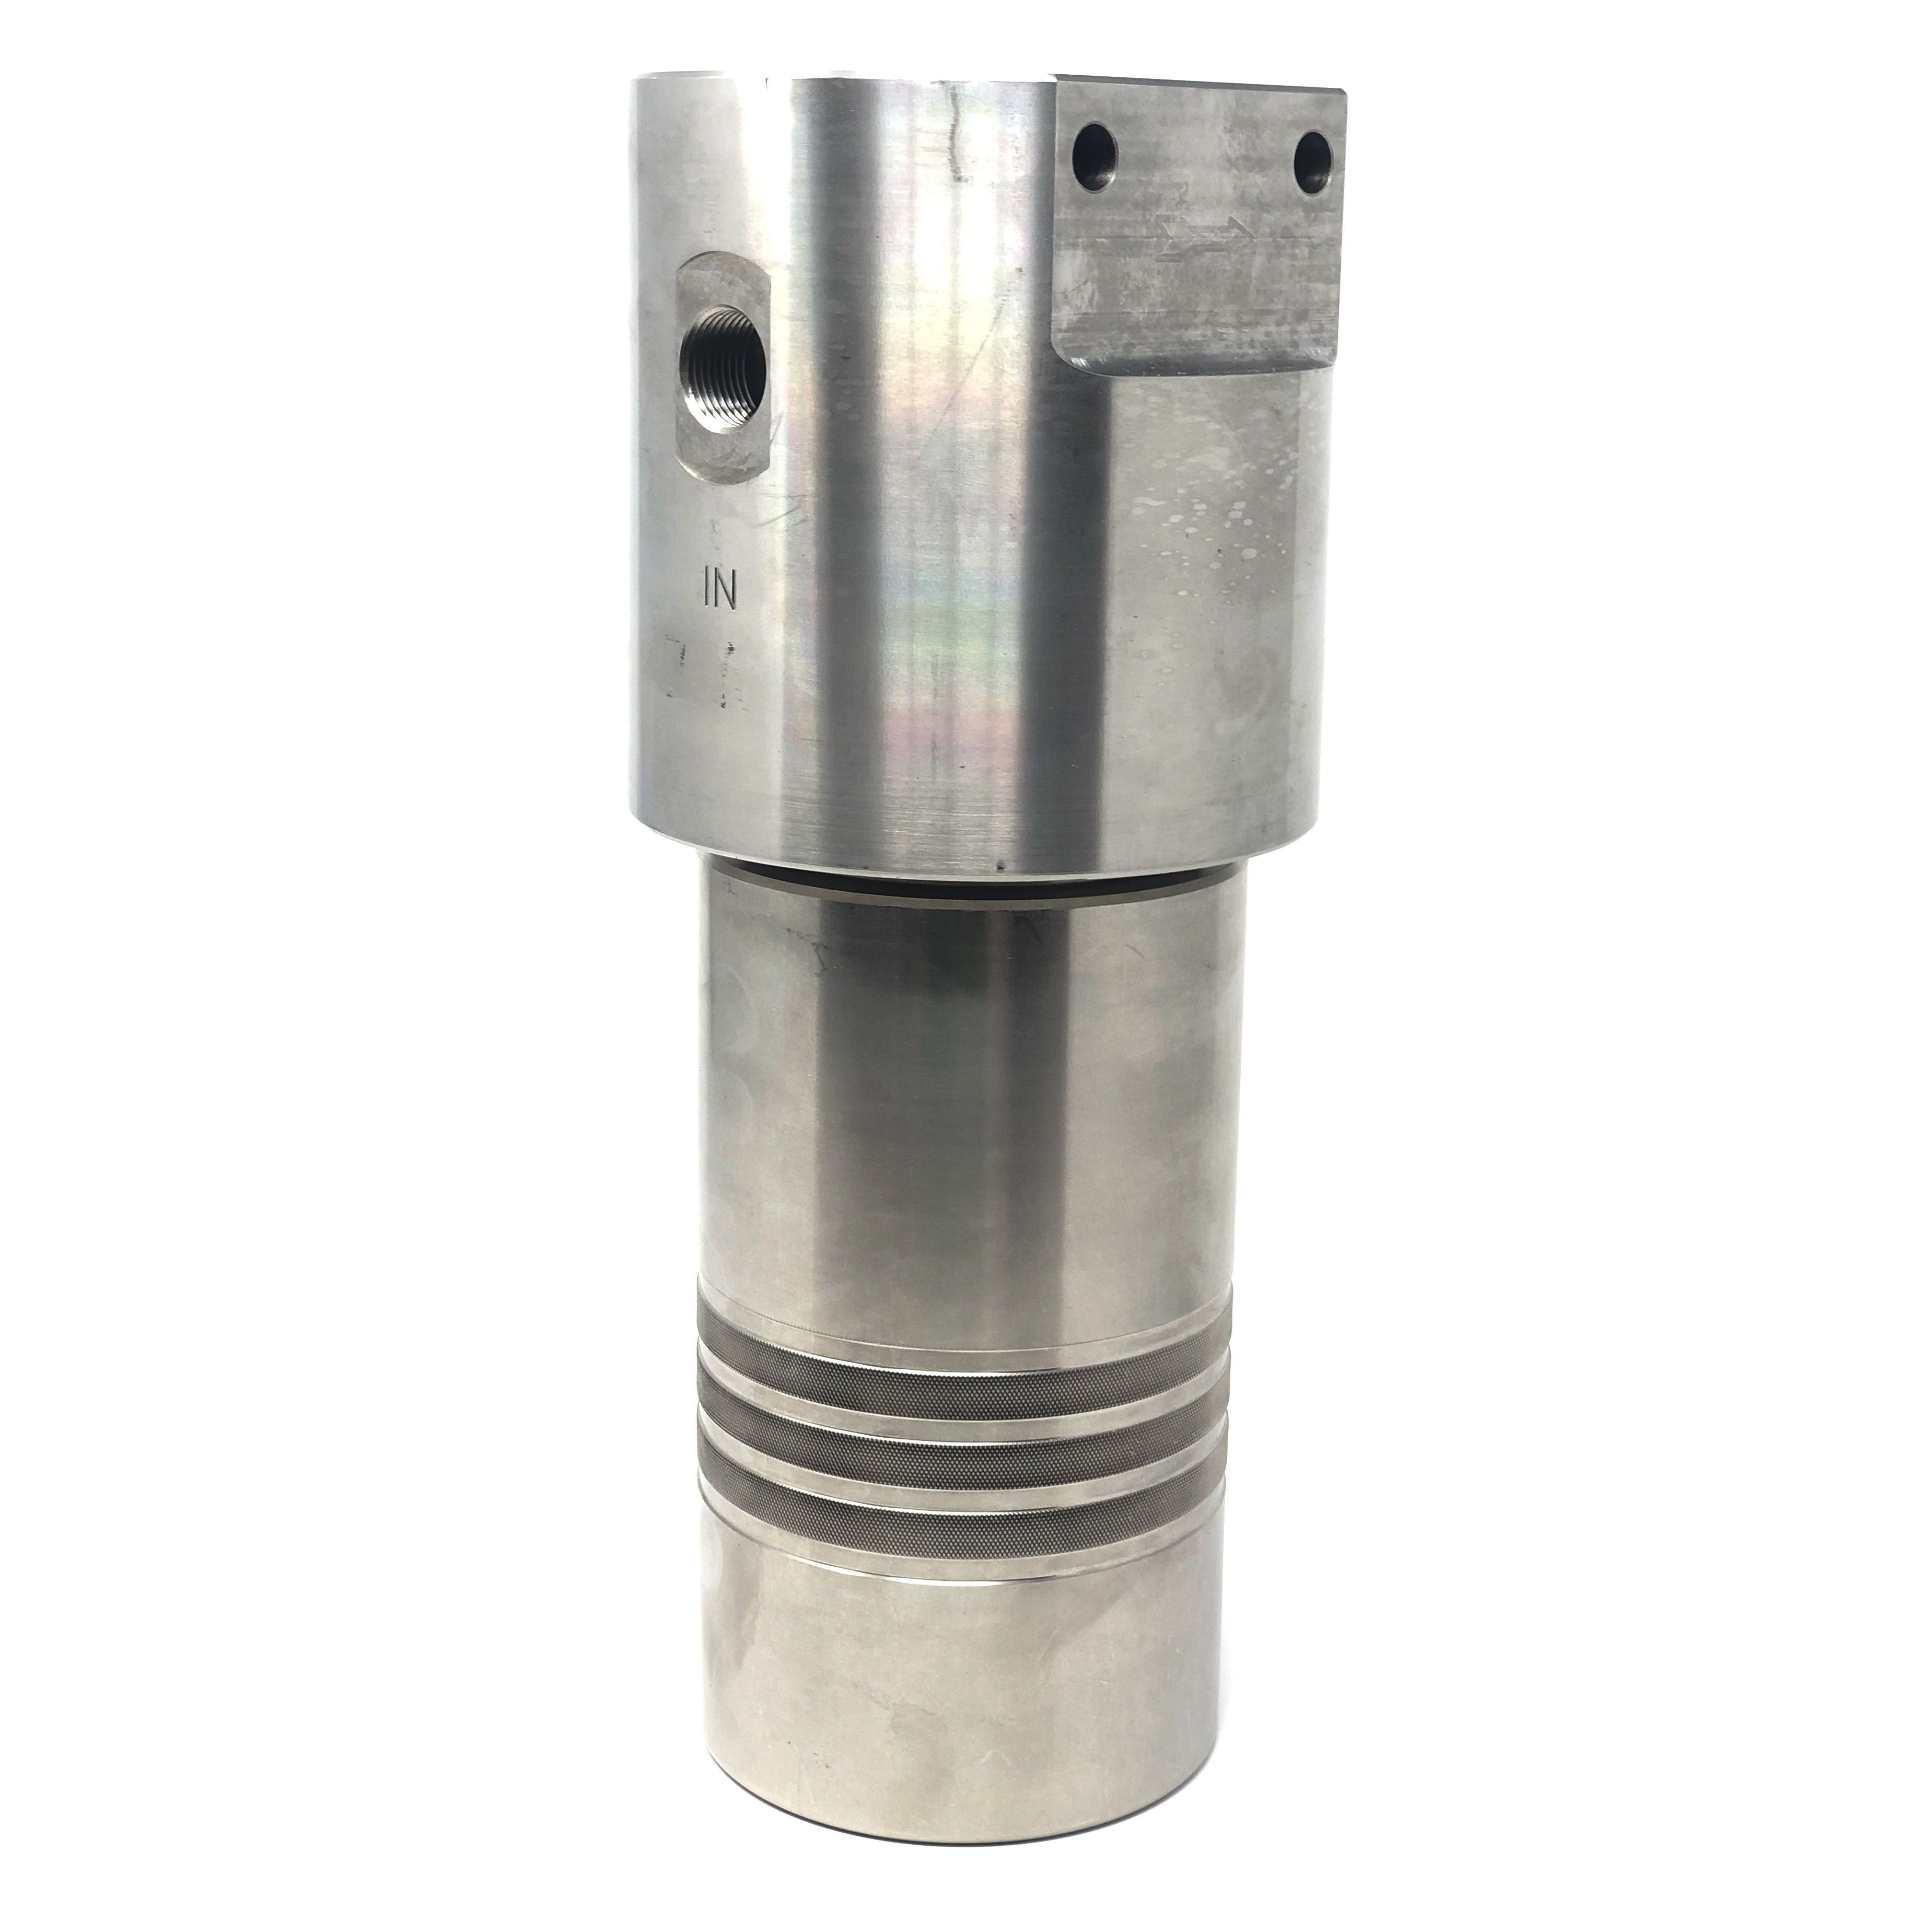 52S-248S-10SEN : Chase Ultra High Pressure Inline Filter, 10000psi, #8 SAE (1/2"), 10 Micron, With Visual Indicator, No Bypass